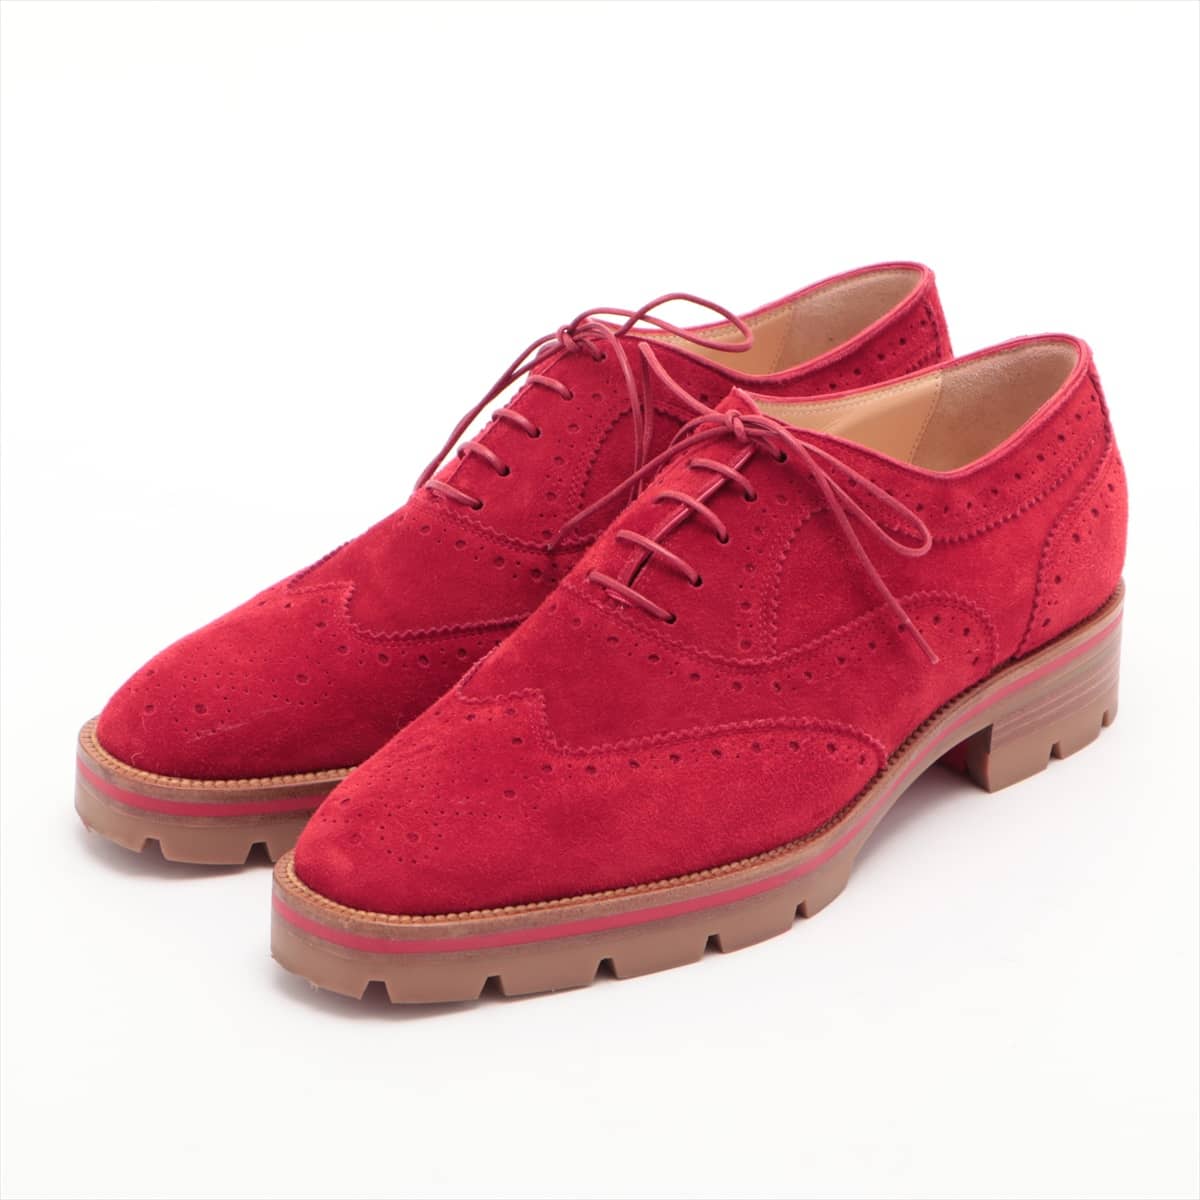 Christian Louboutin Suede Leather shoes 36 Ladies' Red wingtip